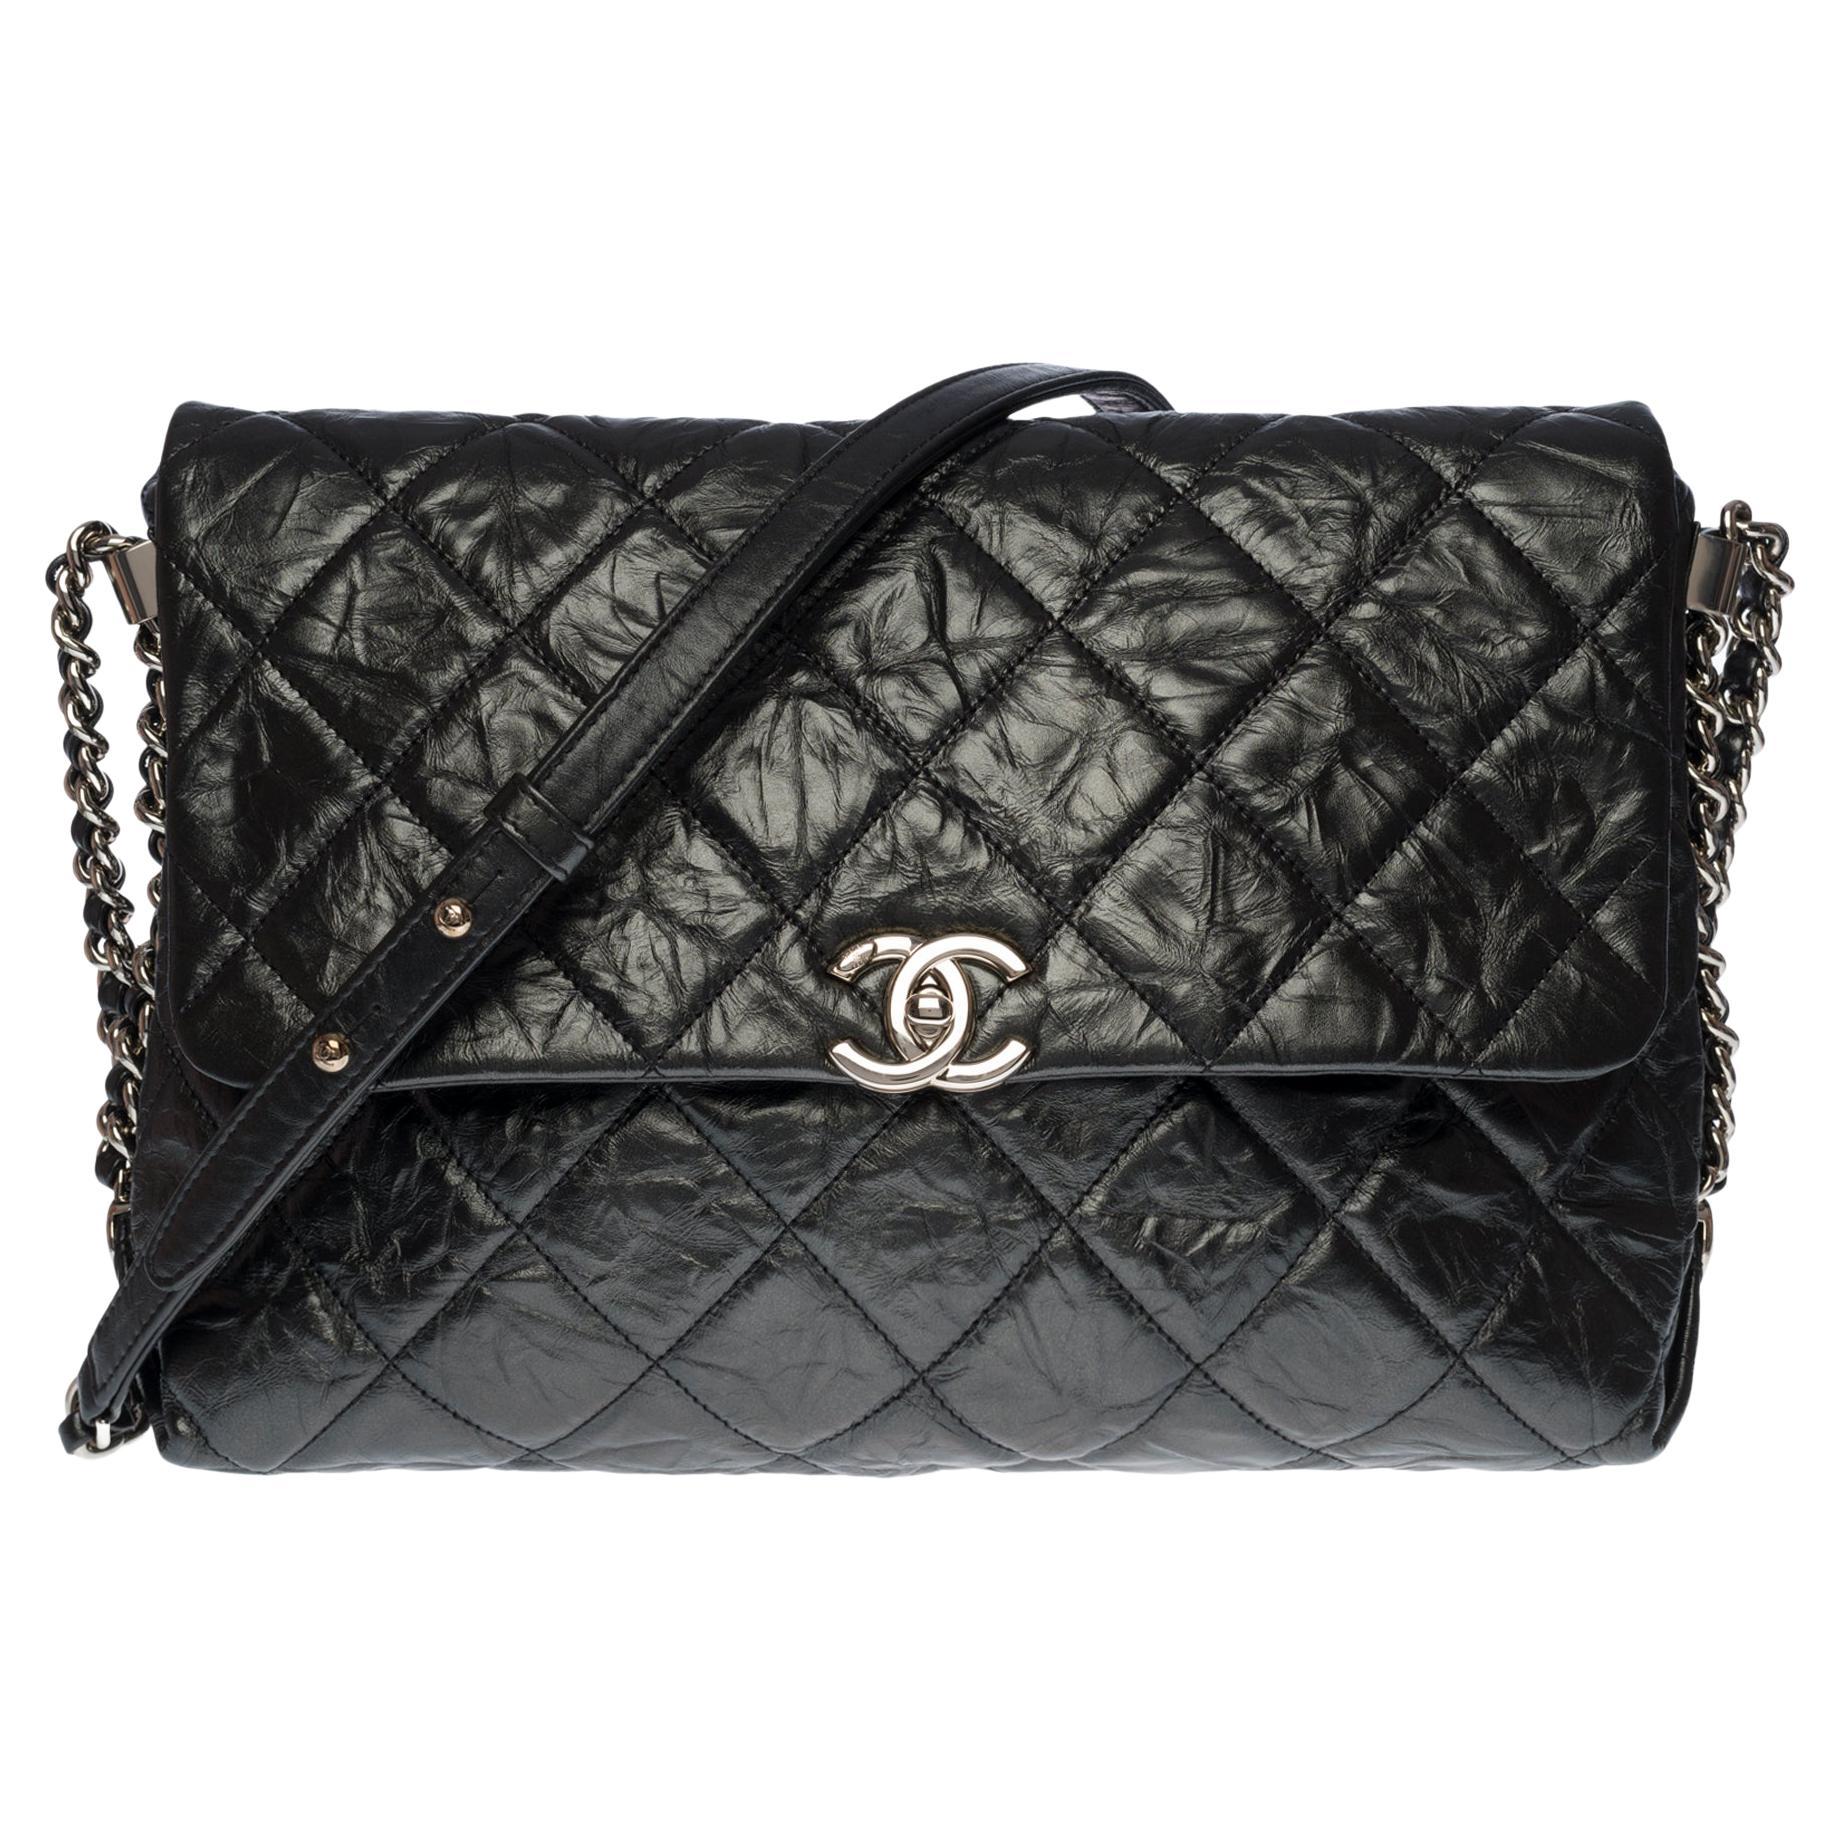 Chanel Chanel Paris Biarritz Mm Coco Mark Tote Bag Leather Black